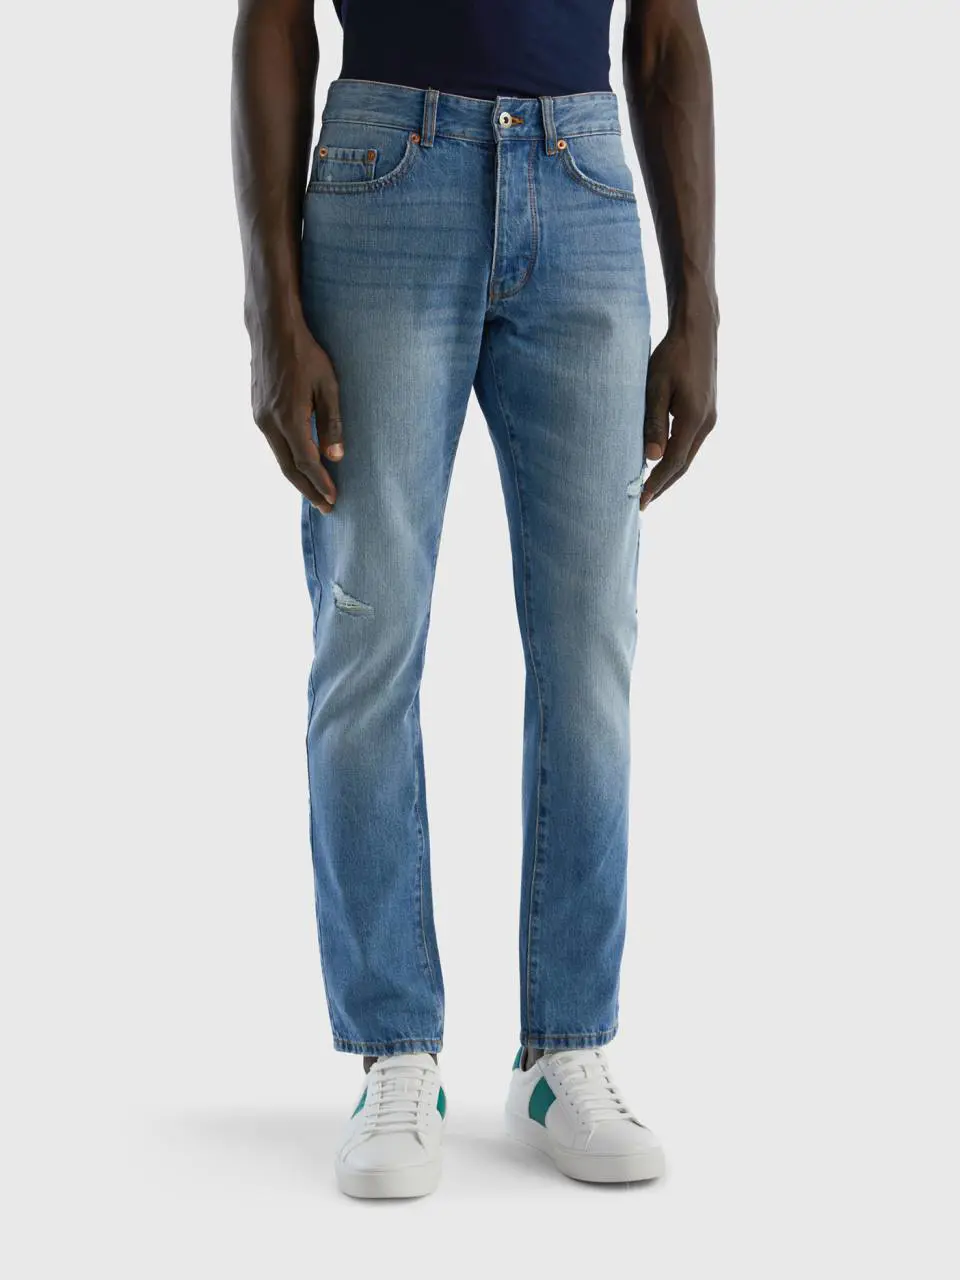 Benetton jeans in 100% cotton with tears. 1